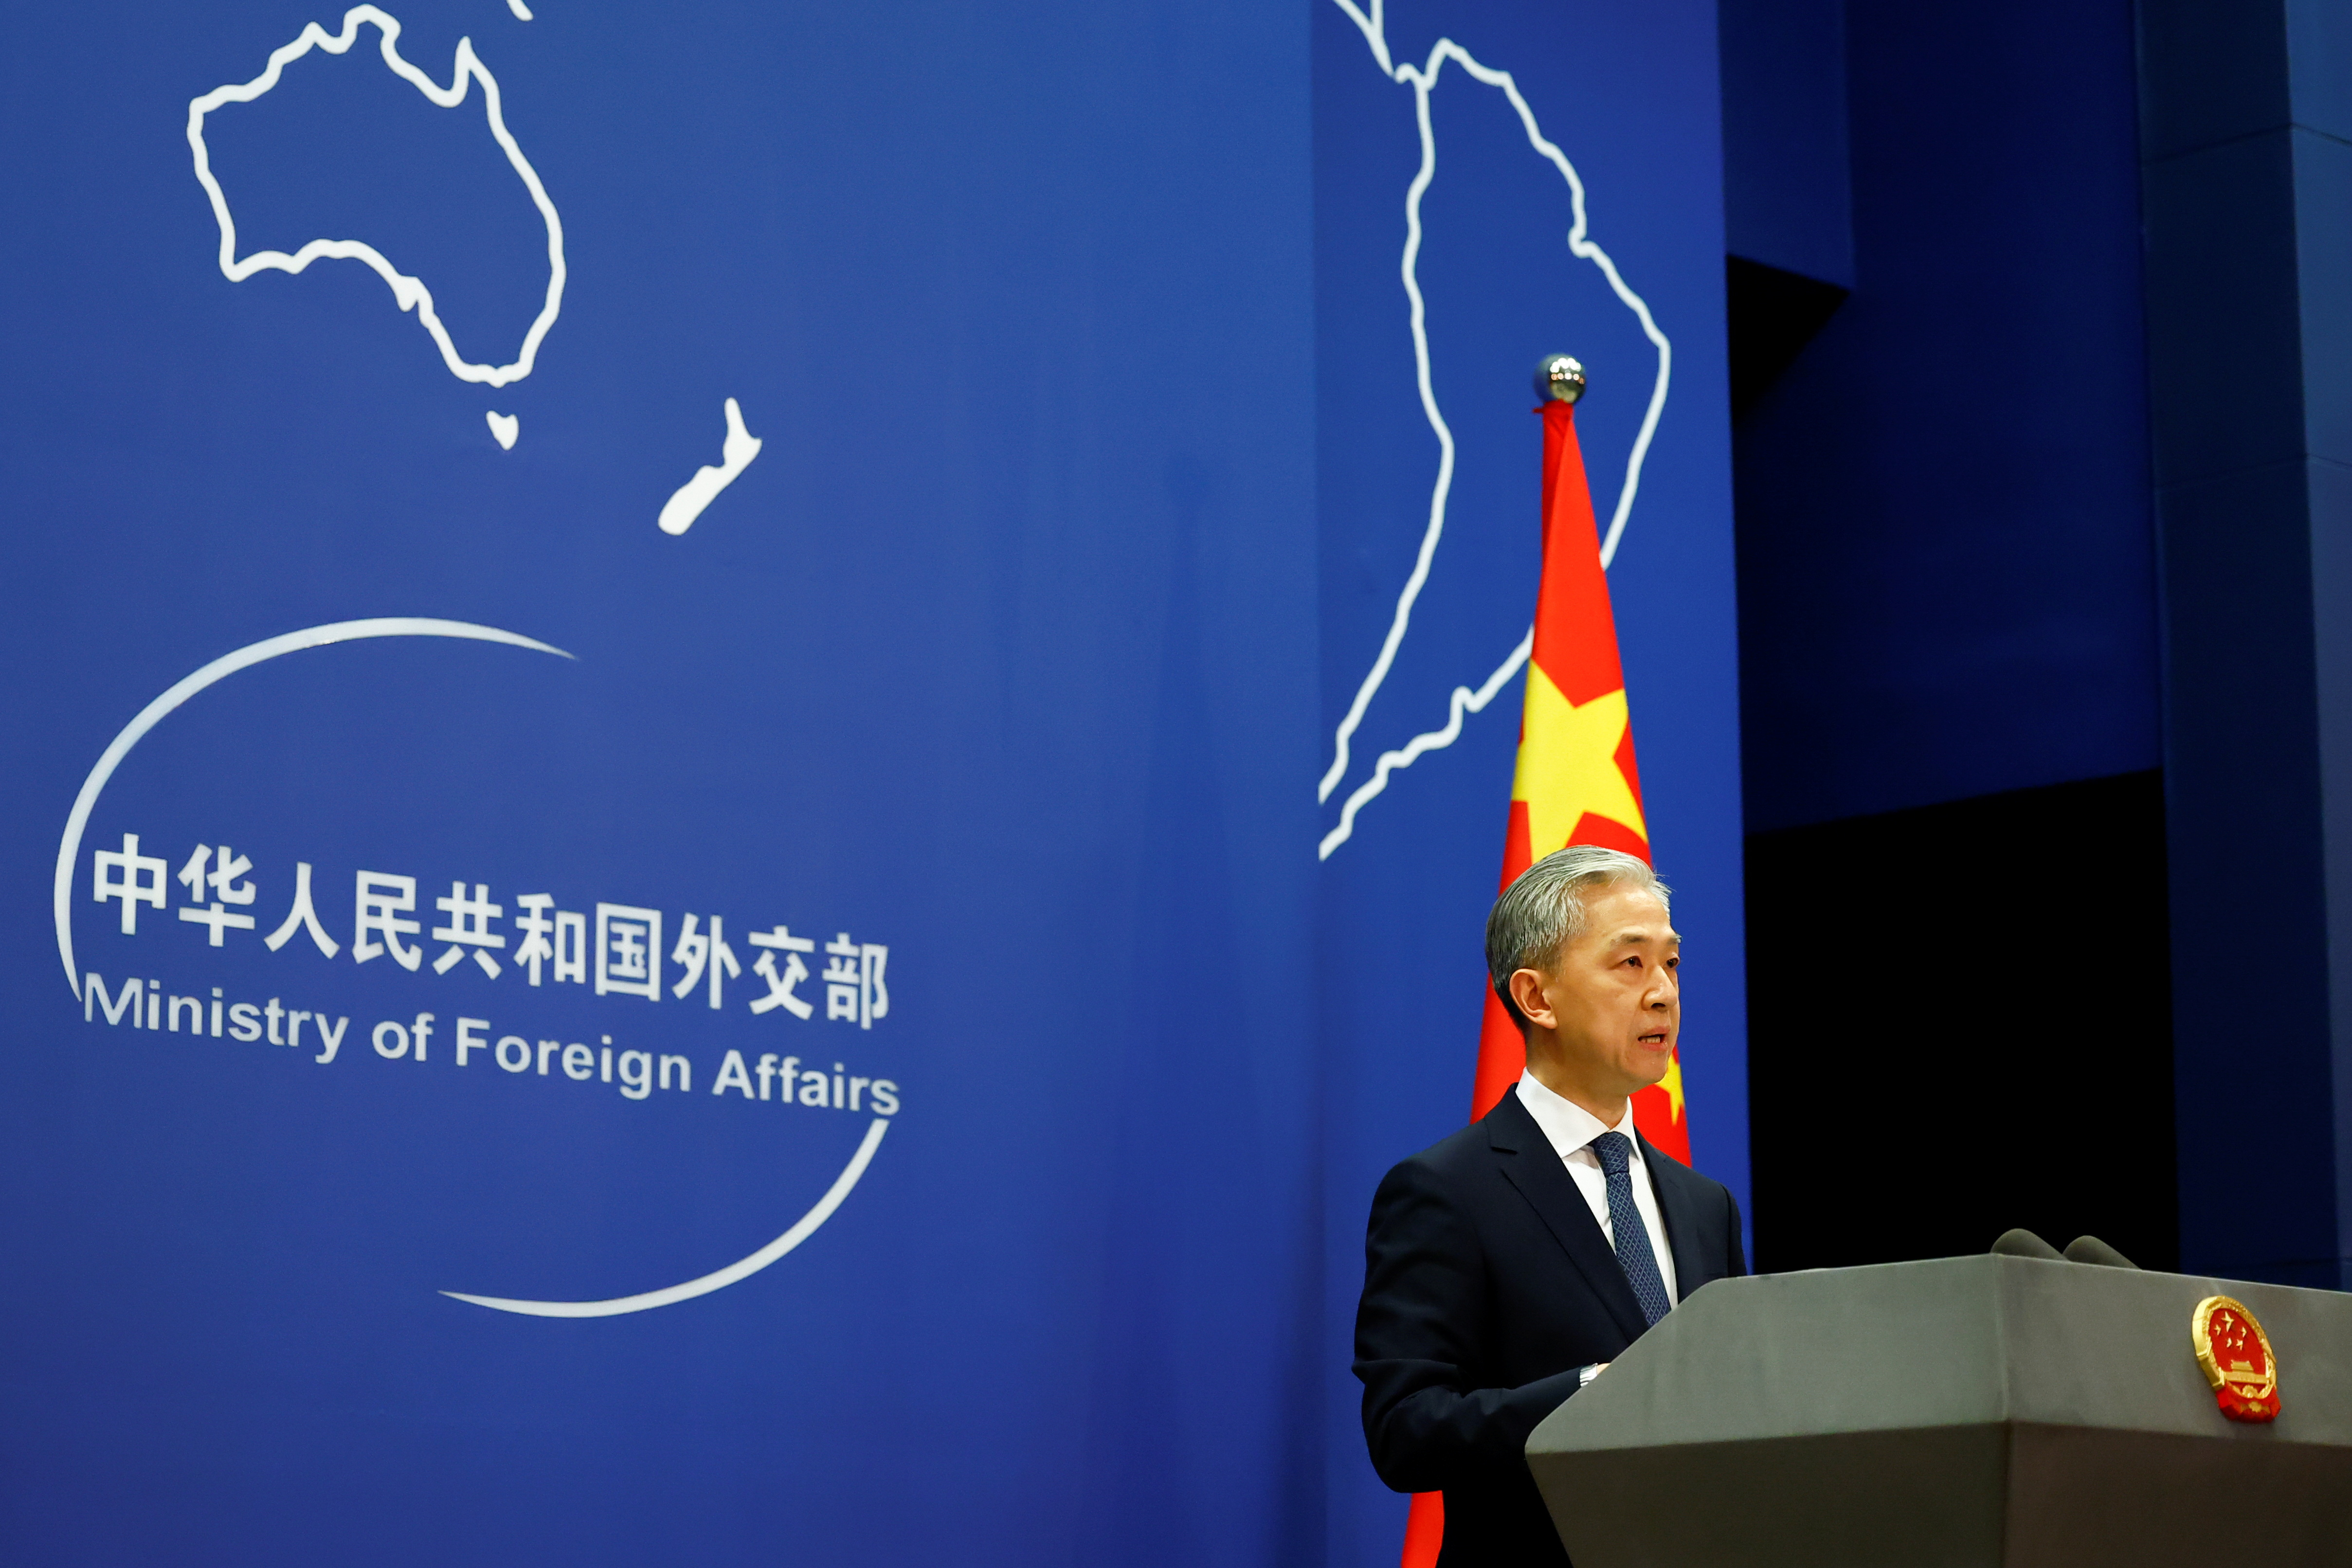 Chinese Foreign Ministry spokesperson Wang Wenbin speaks during a news conference in Beijing